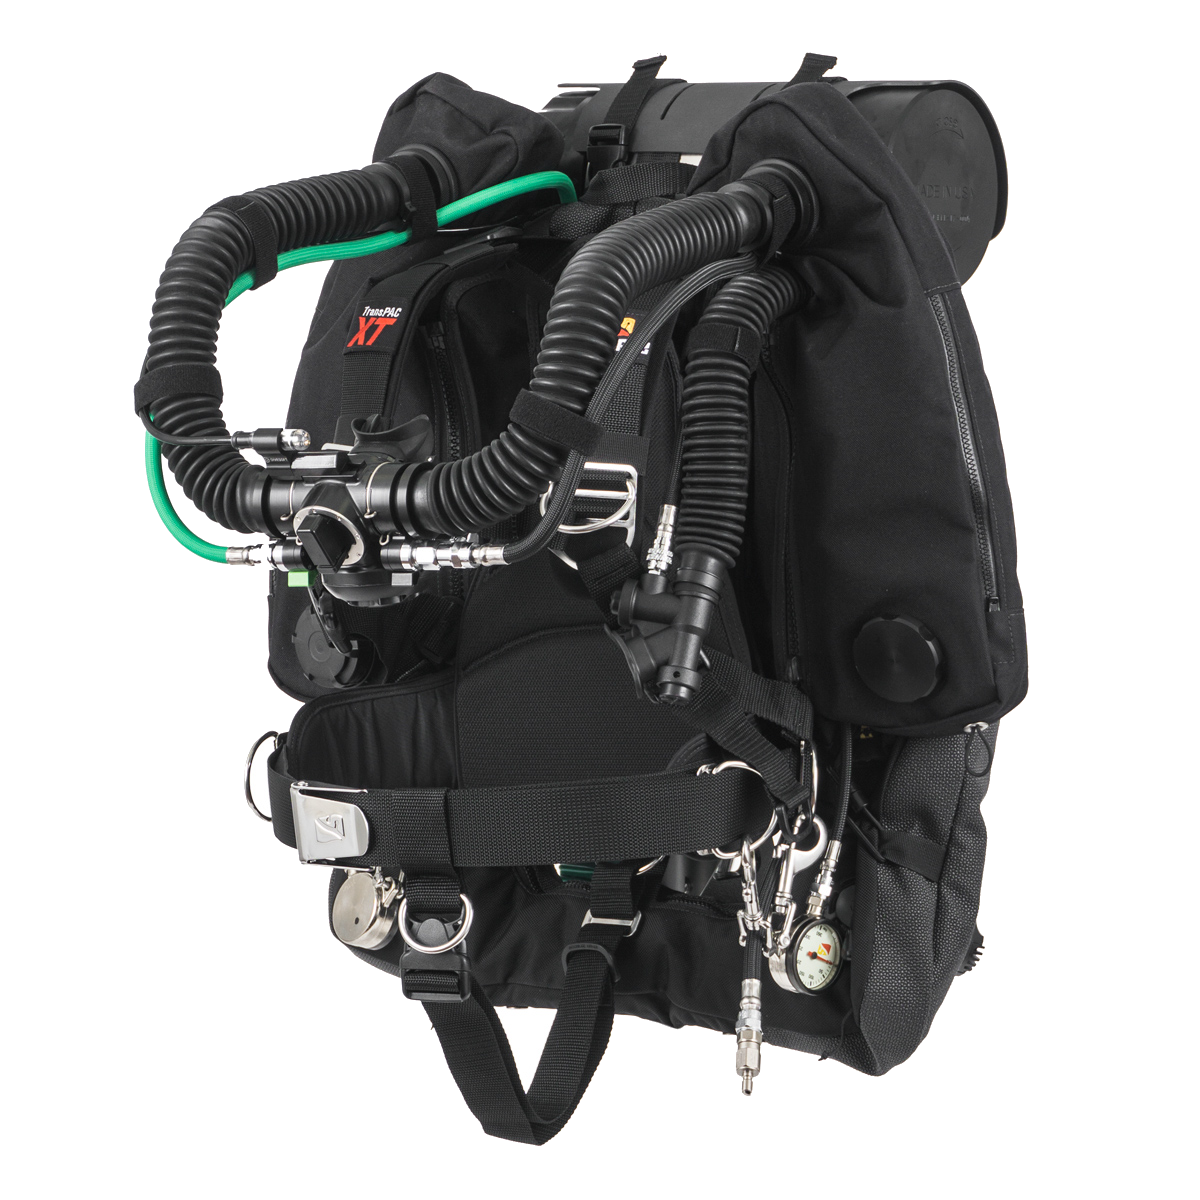 AP Inspiration Rebreather Features